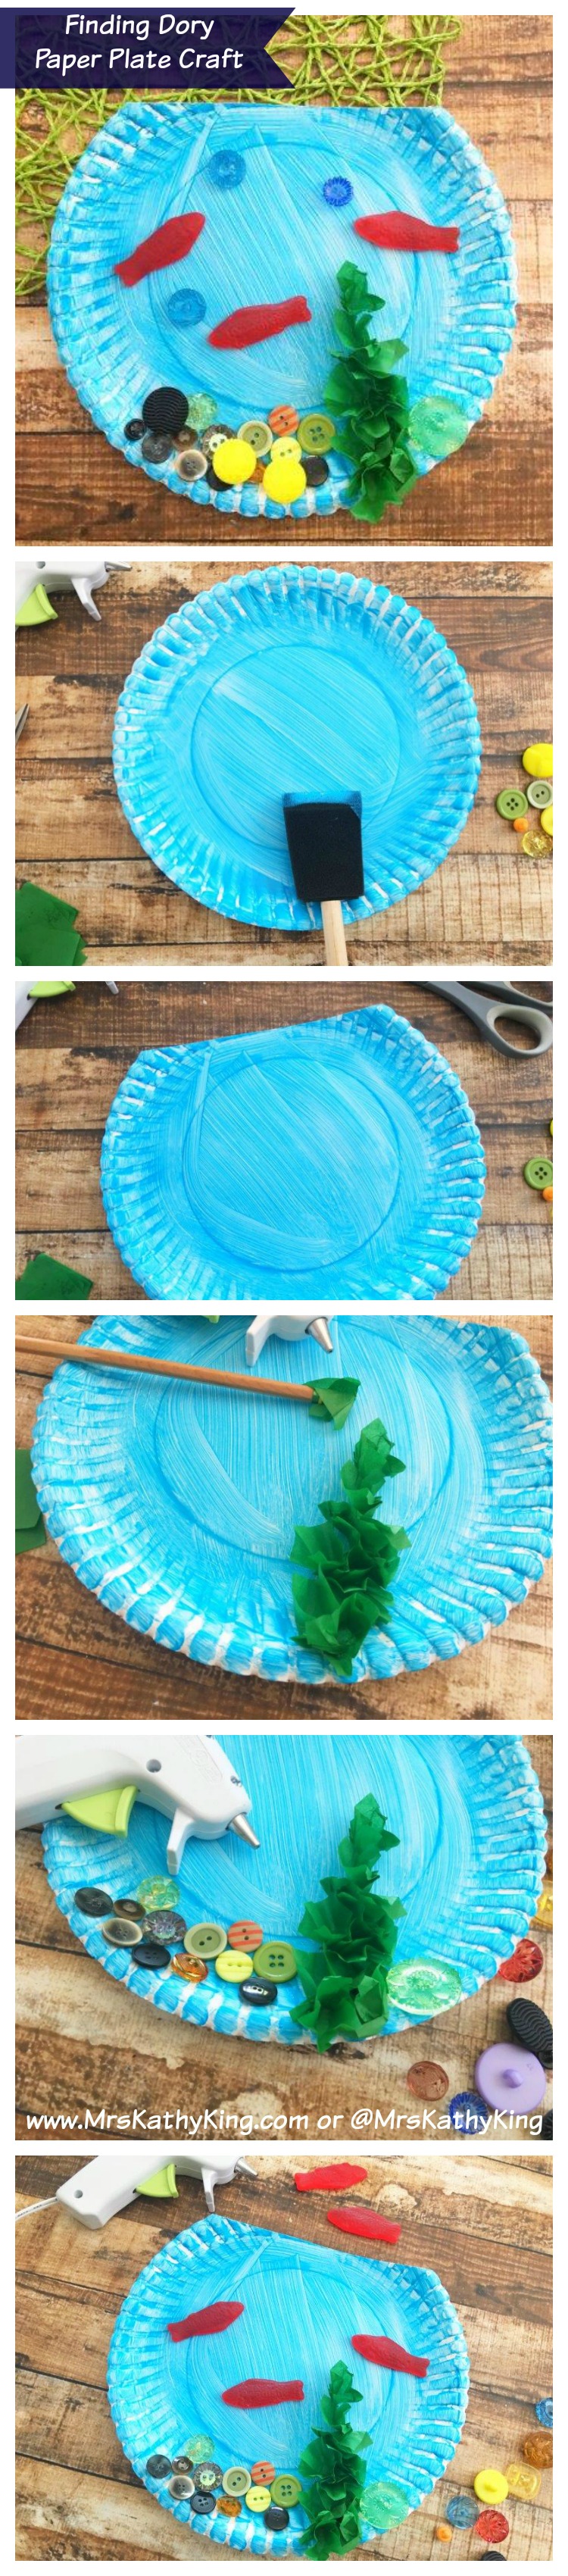  Finding Dory Paper Plate Craft